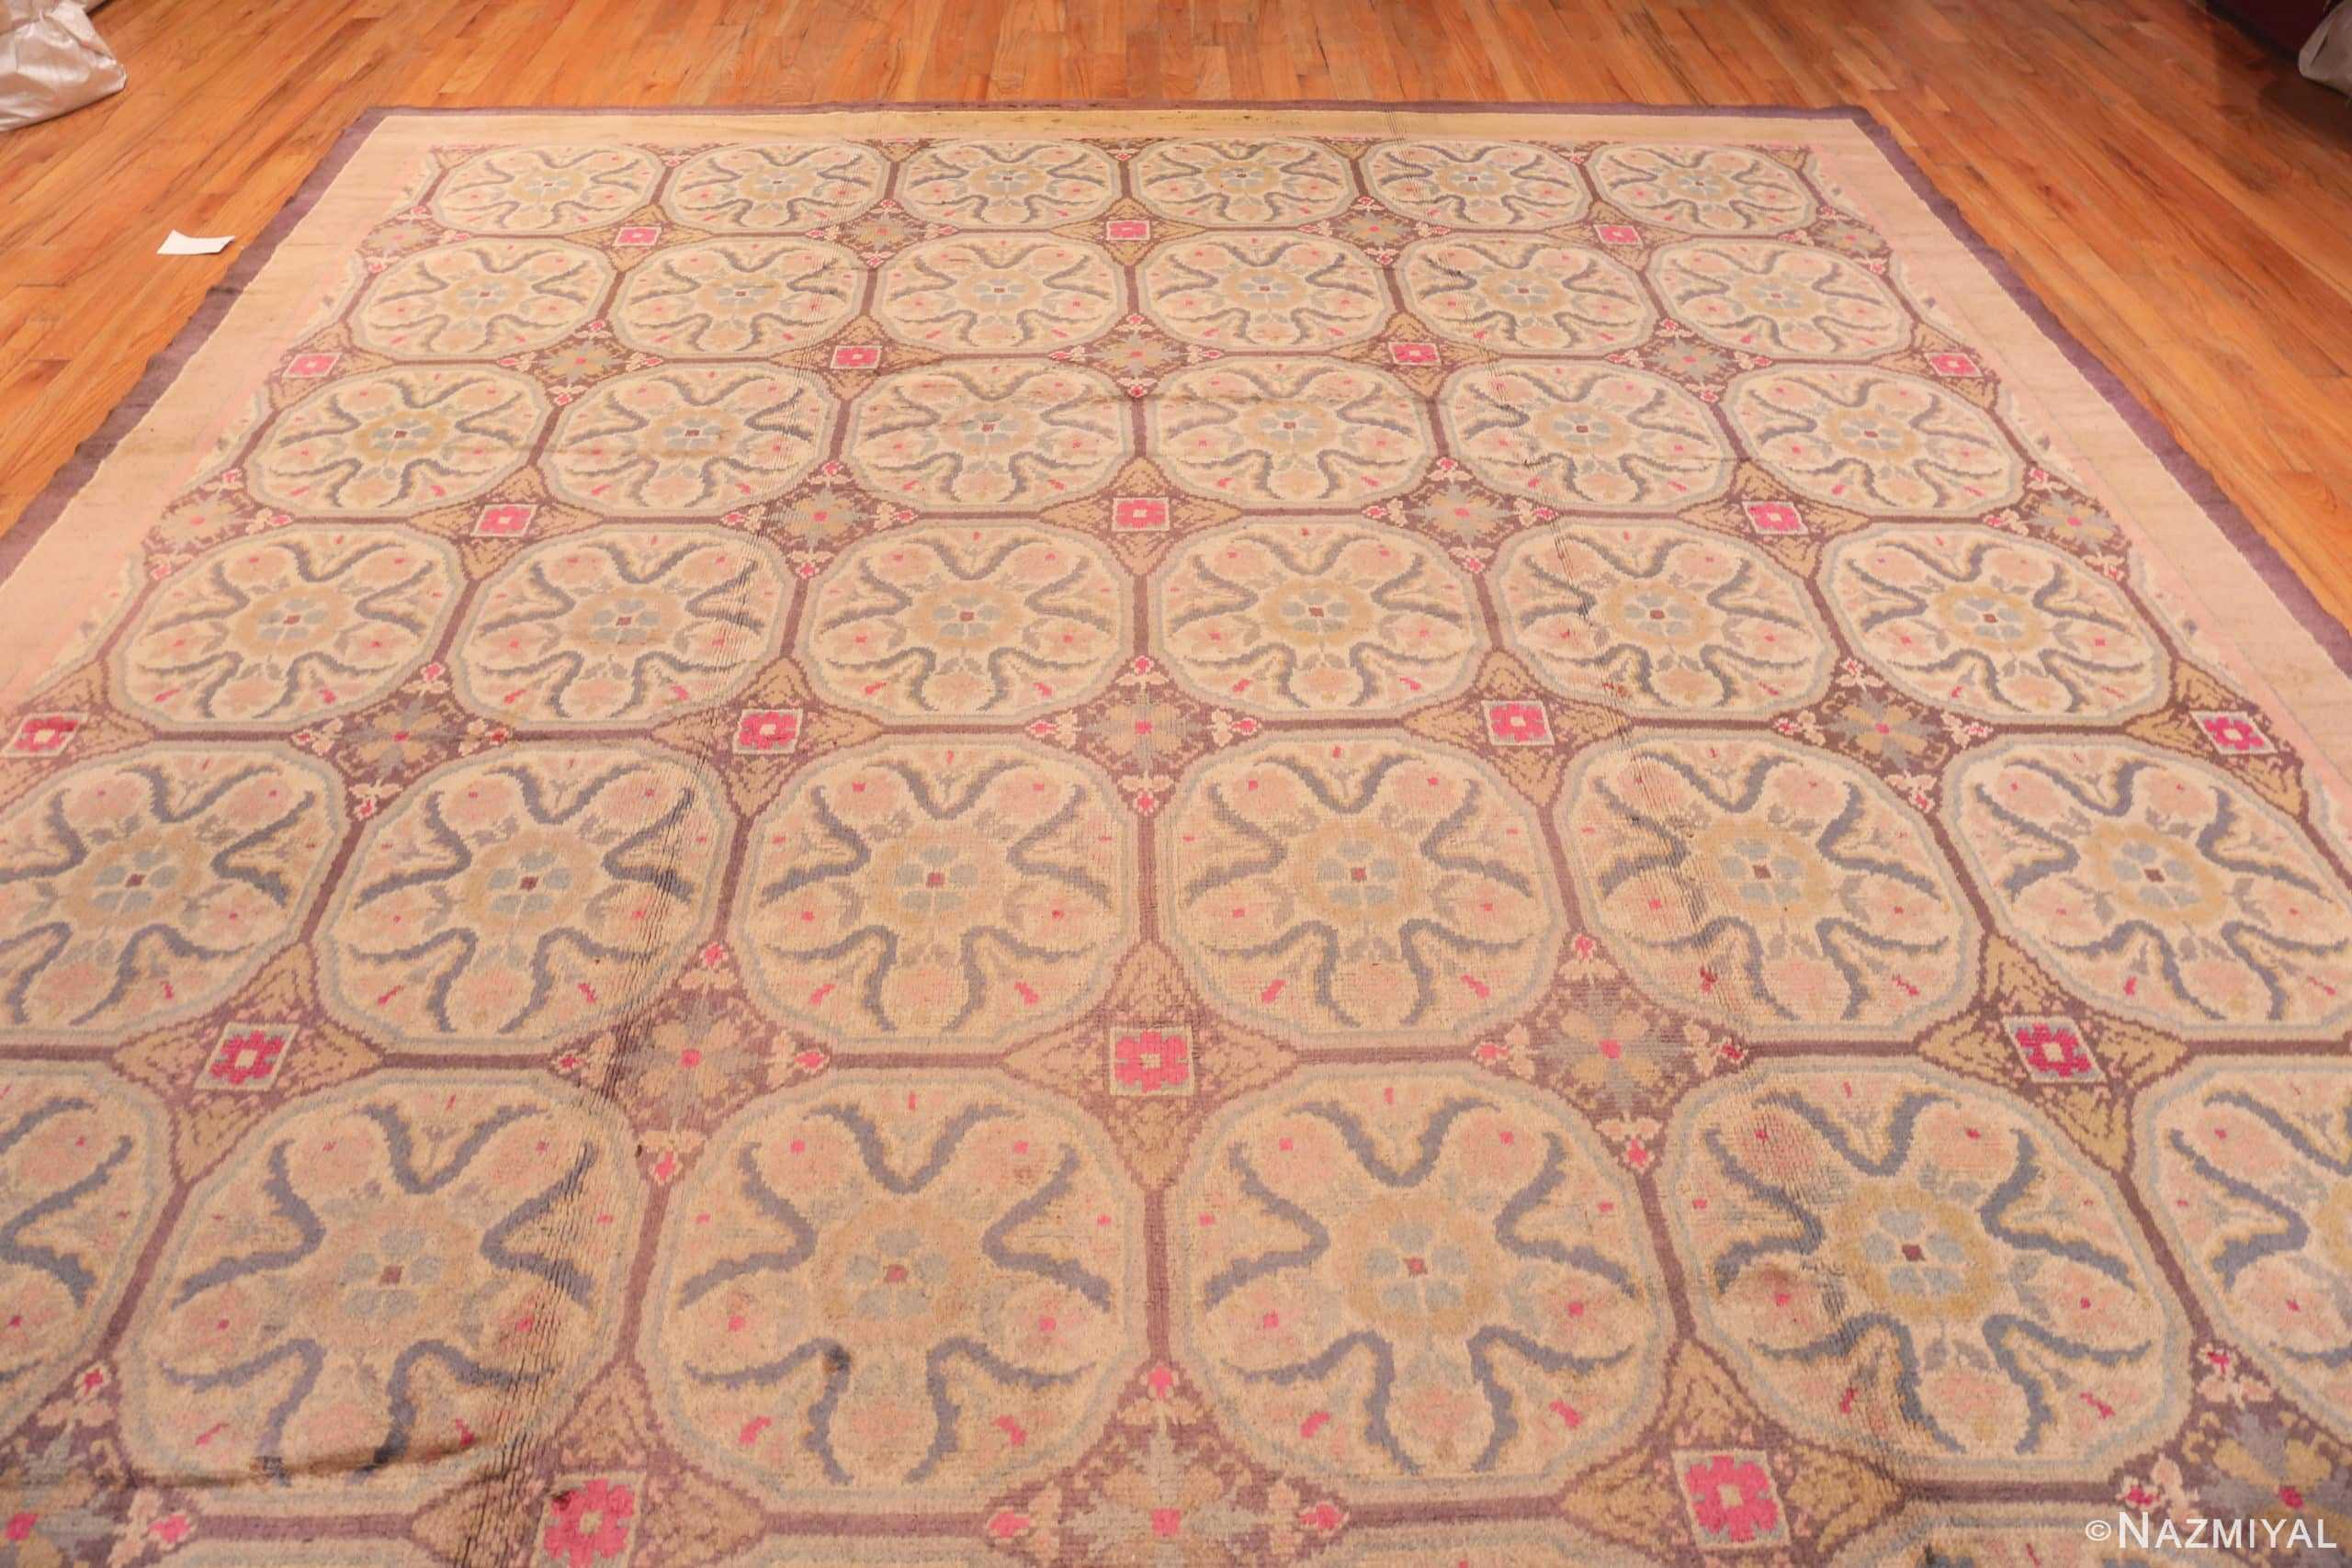 Whole View Of Large Antique Spanish Rug 70408 by Nazmiyal Antique Rugs